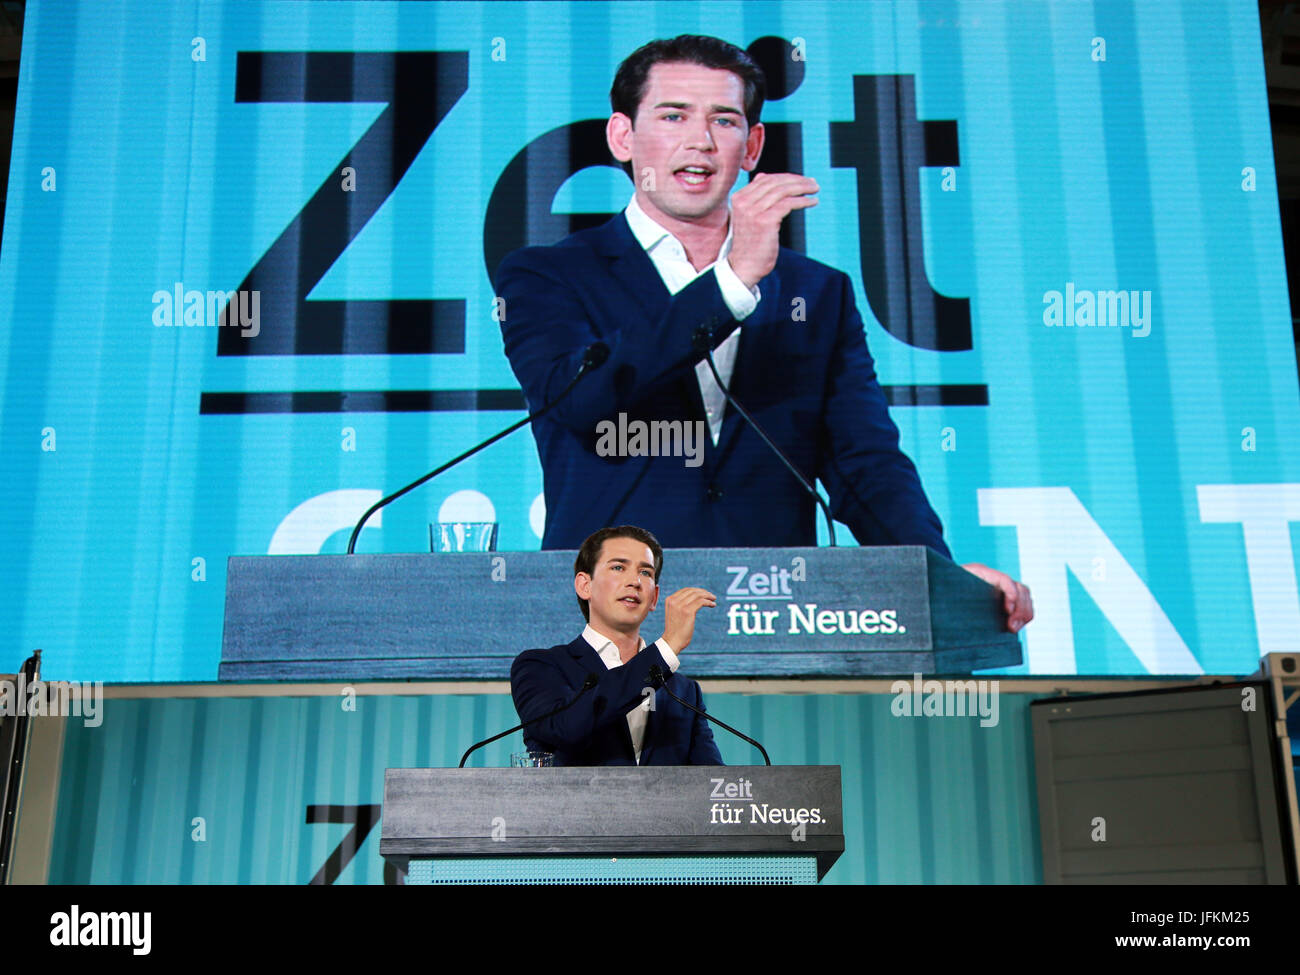 Linz, Austria. 1st July, 2017. Austrian Foreign Minister Sebastian Kurz addresses the national congress of the People's Party in Linz, Austria, July 1, 2017. Thirty-year-old Sebastian Kurz was elected as the leader of the People's Party at the congress in Linz on Saturday. Credit: Pan Xu/Xinhua/Alamy Live News Stock Photo